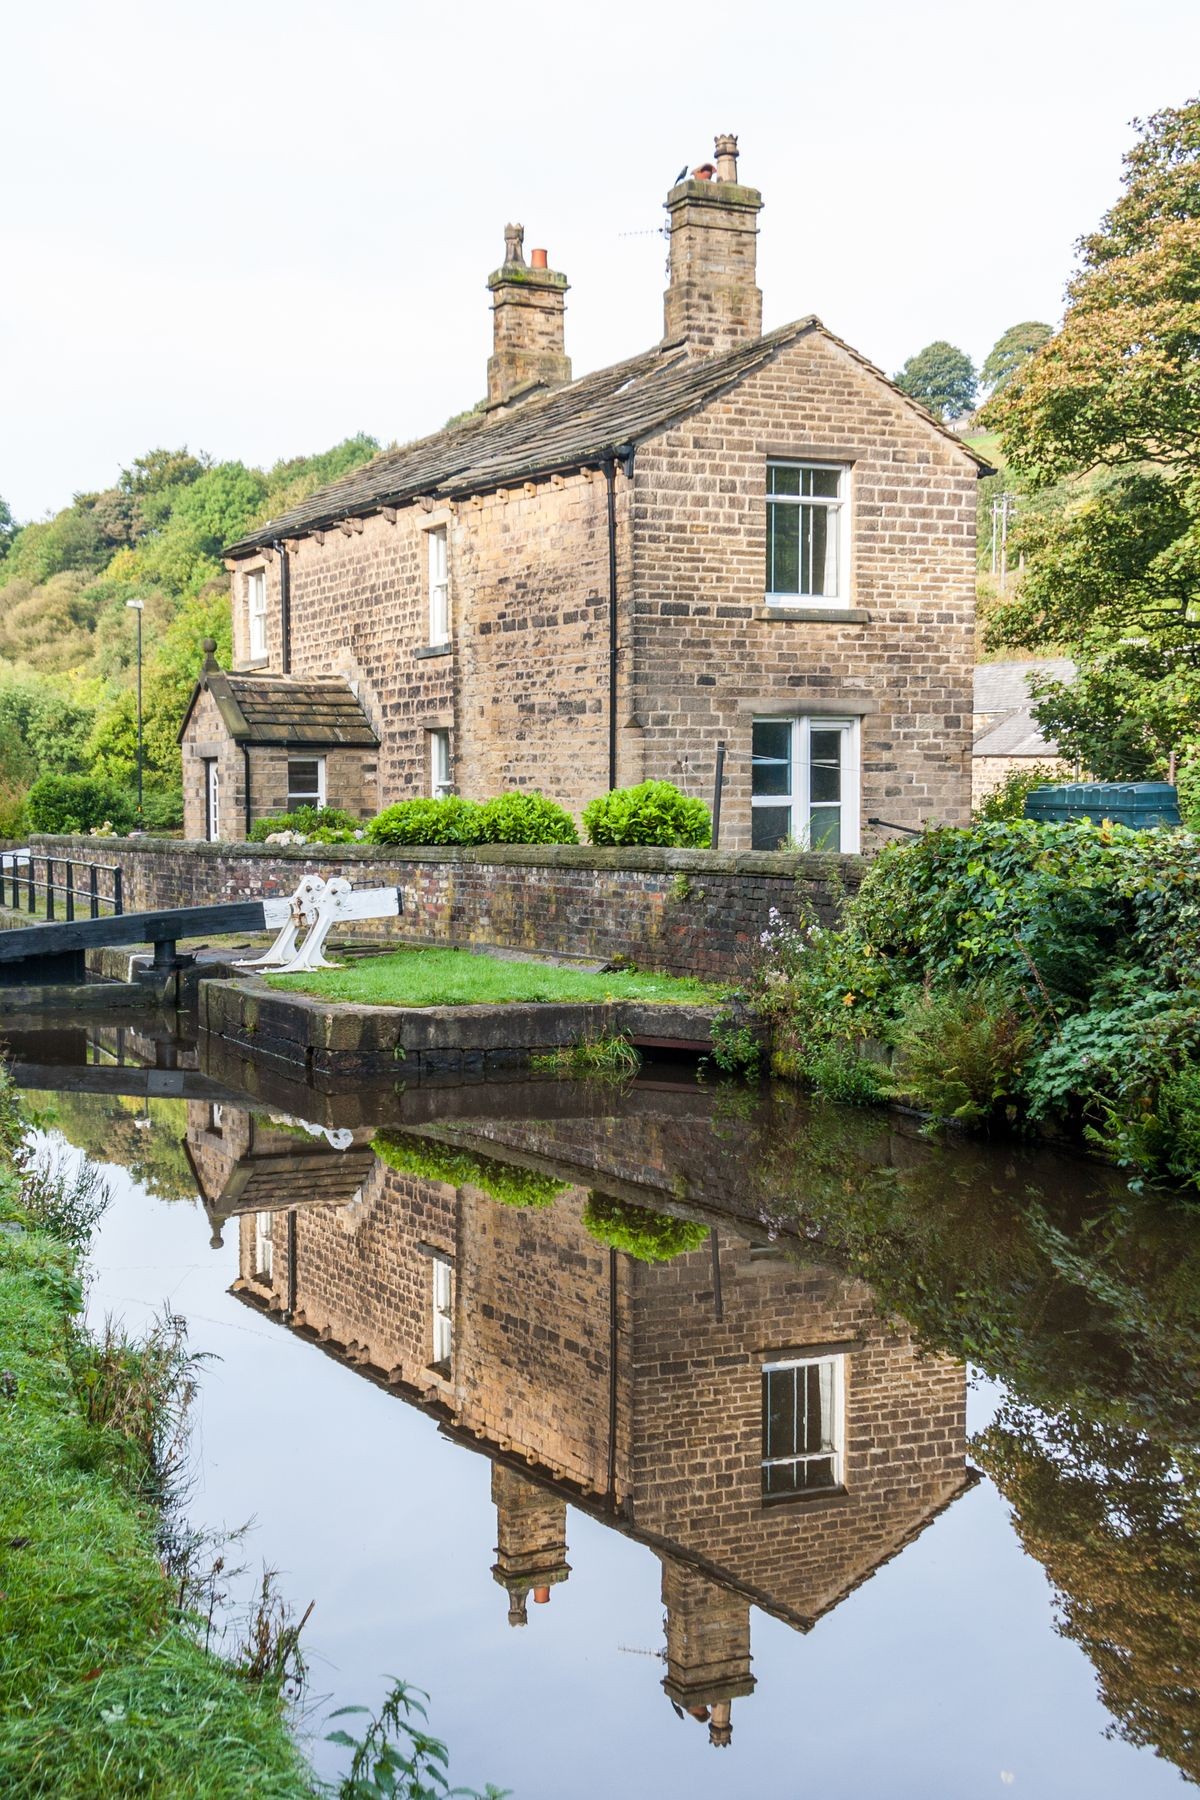 House reflected in the water, Huddersfield narrow canal, Diggle, Saddleworth, Oldham, England, United Kingdom